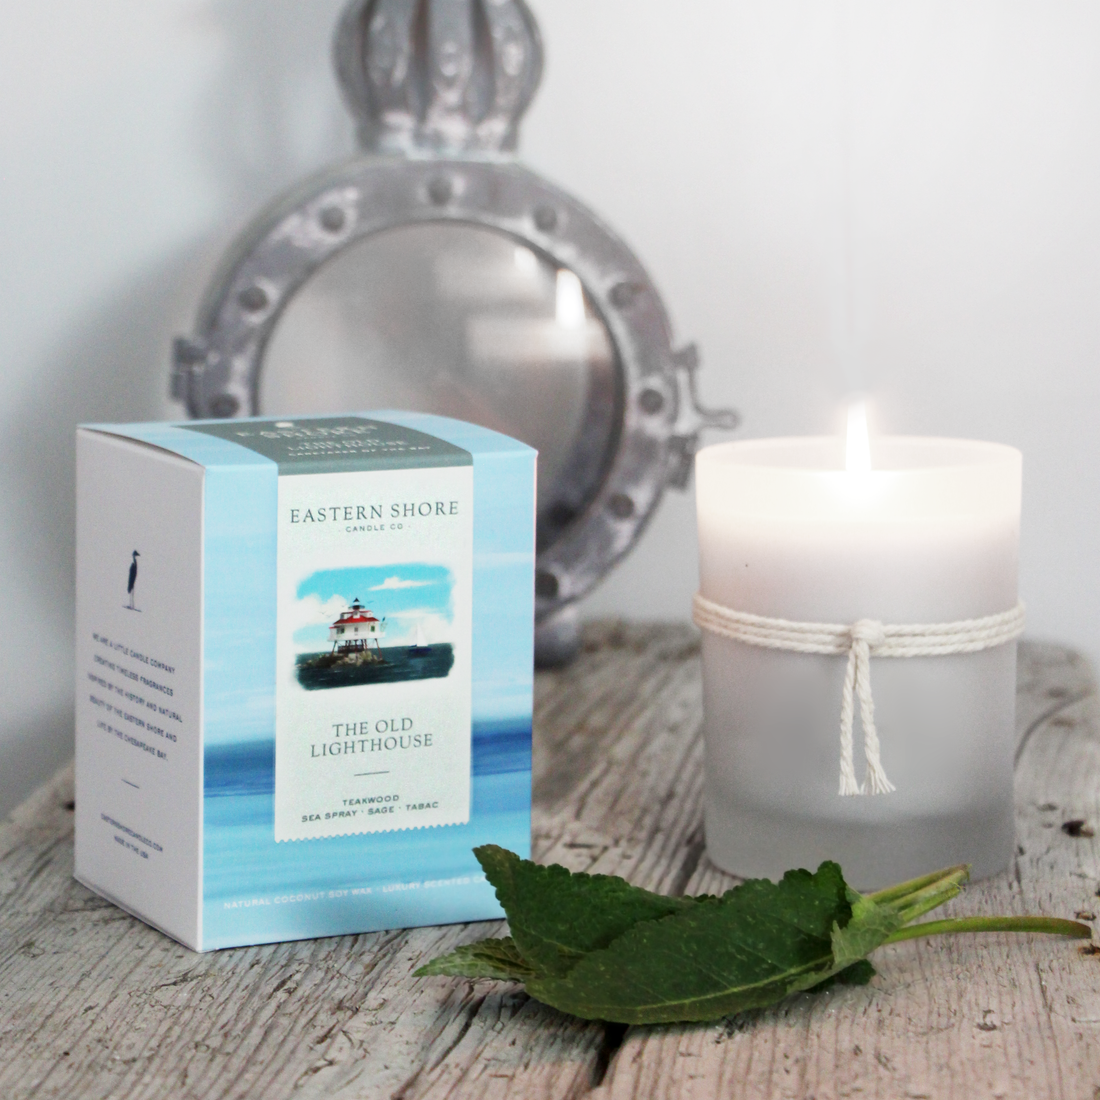 Lighthouse candle, long burning coconut soy wax, eastern shore candles, candles maryland, annapolis lighthouse, annpolist lighthouse candle,thomas point lighthouse candle, thomas lighthouse, old lighthouse on the chesapeake bay